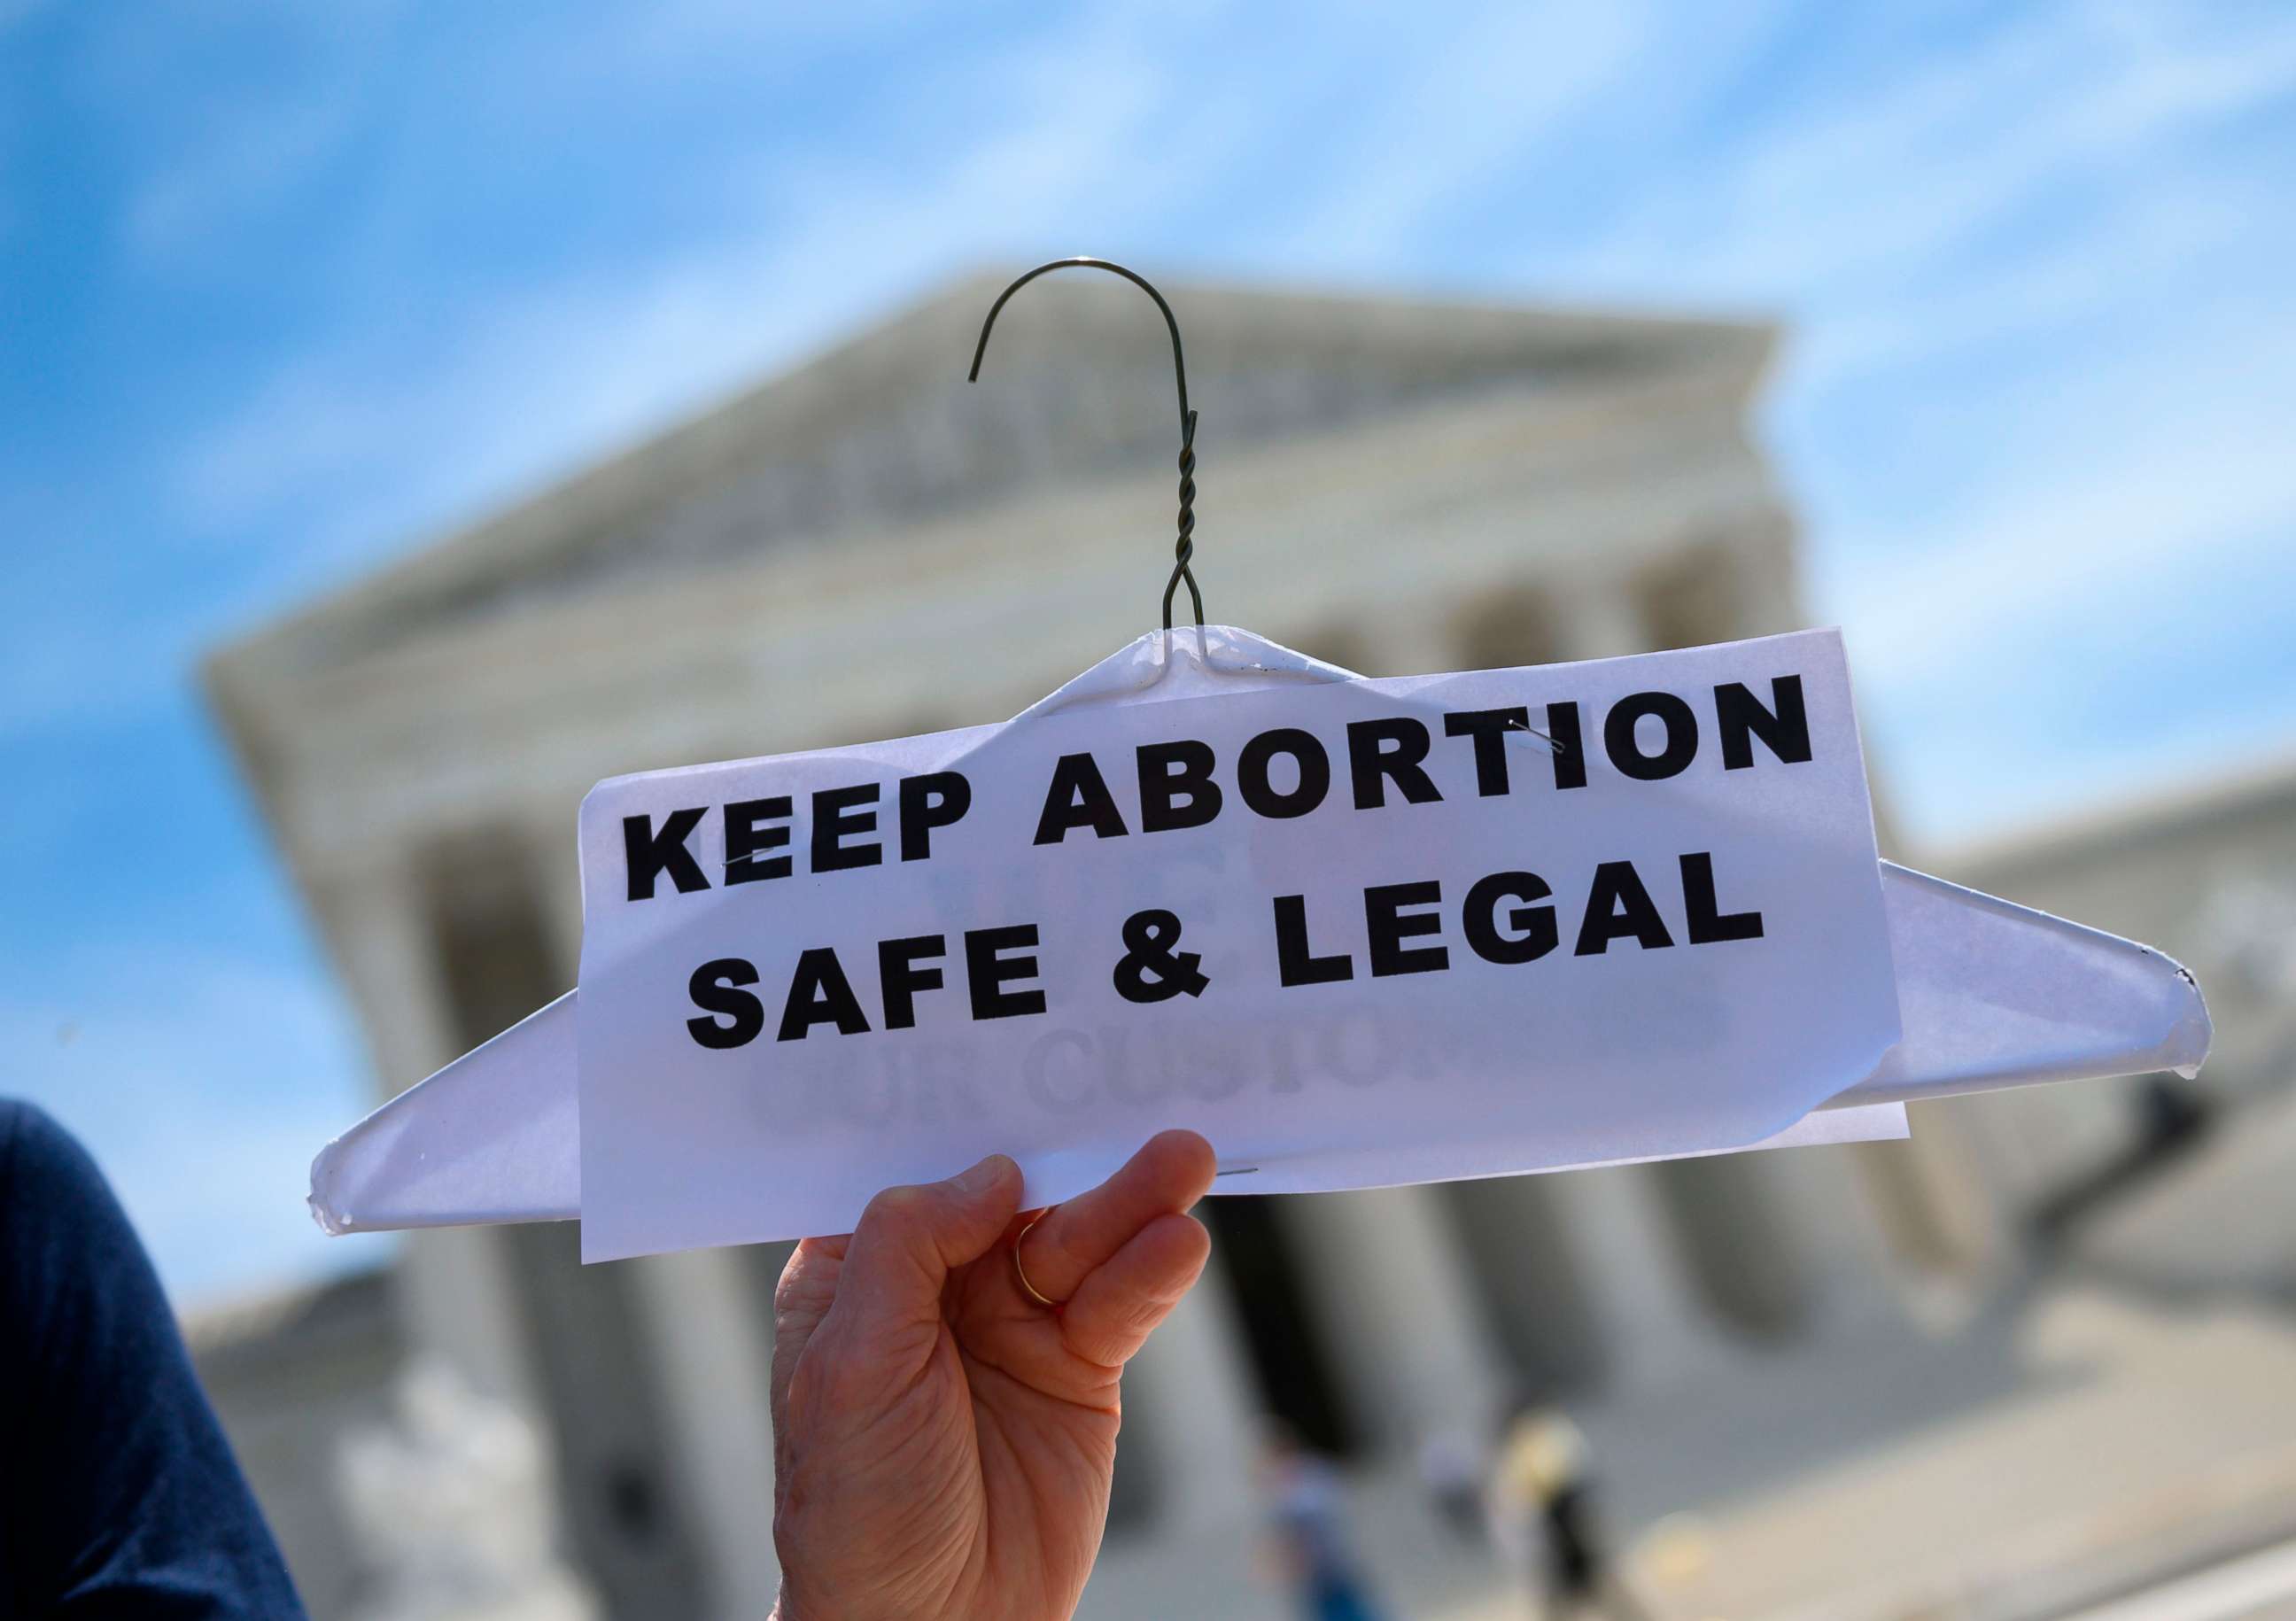 PHOTO:Abortion rights activists rally in front of the US Supreme Court in Washington, D.C., May 21, 2019. Demonstrations were planned across the US on Tuesday in defense of abortion rights, which activists see as increasingly under attack.